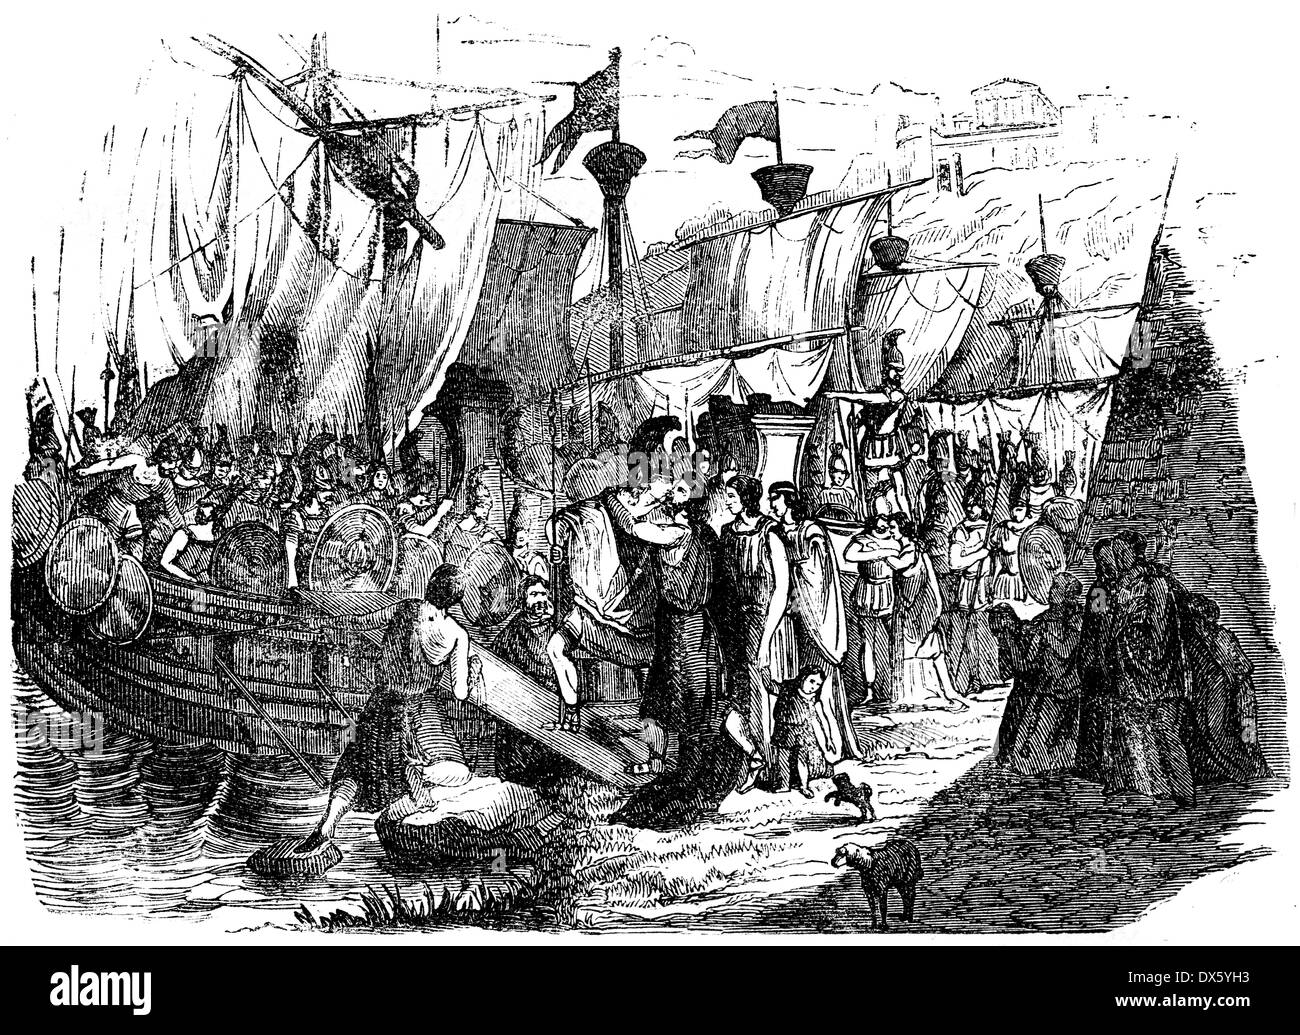 Departure of fleet, illustration from book dated 1878 Stock Photo